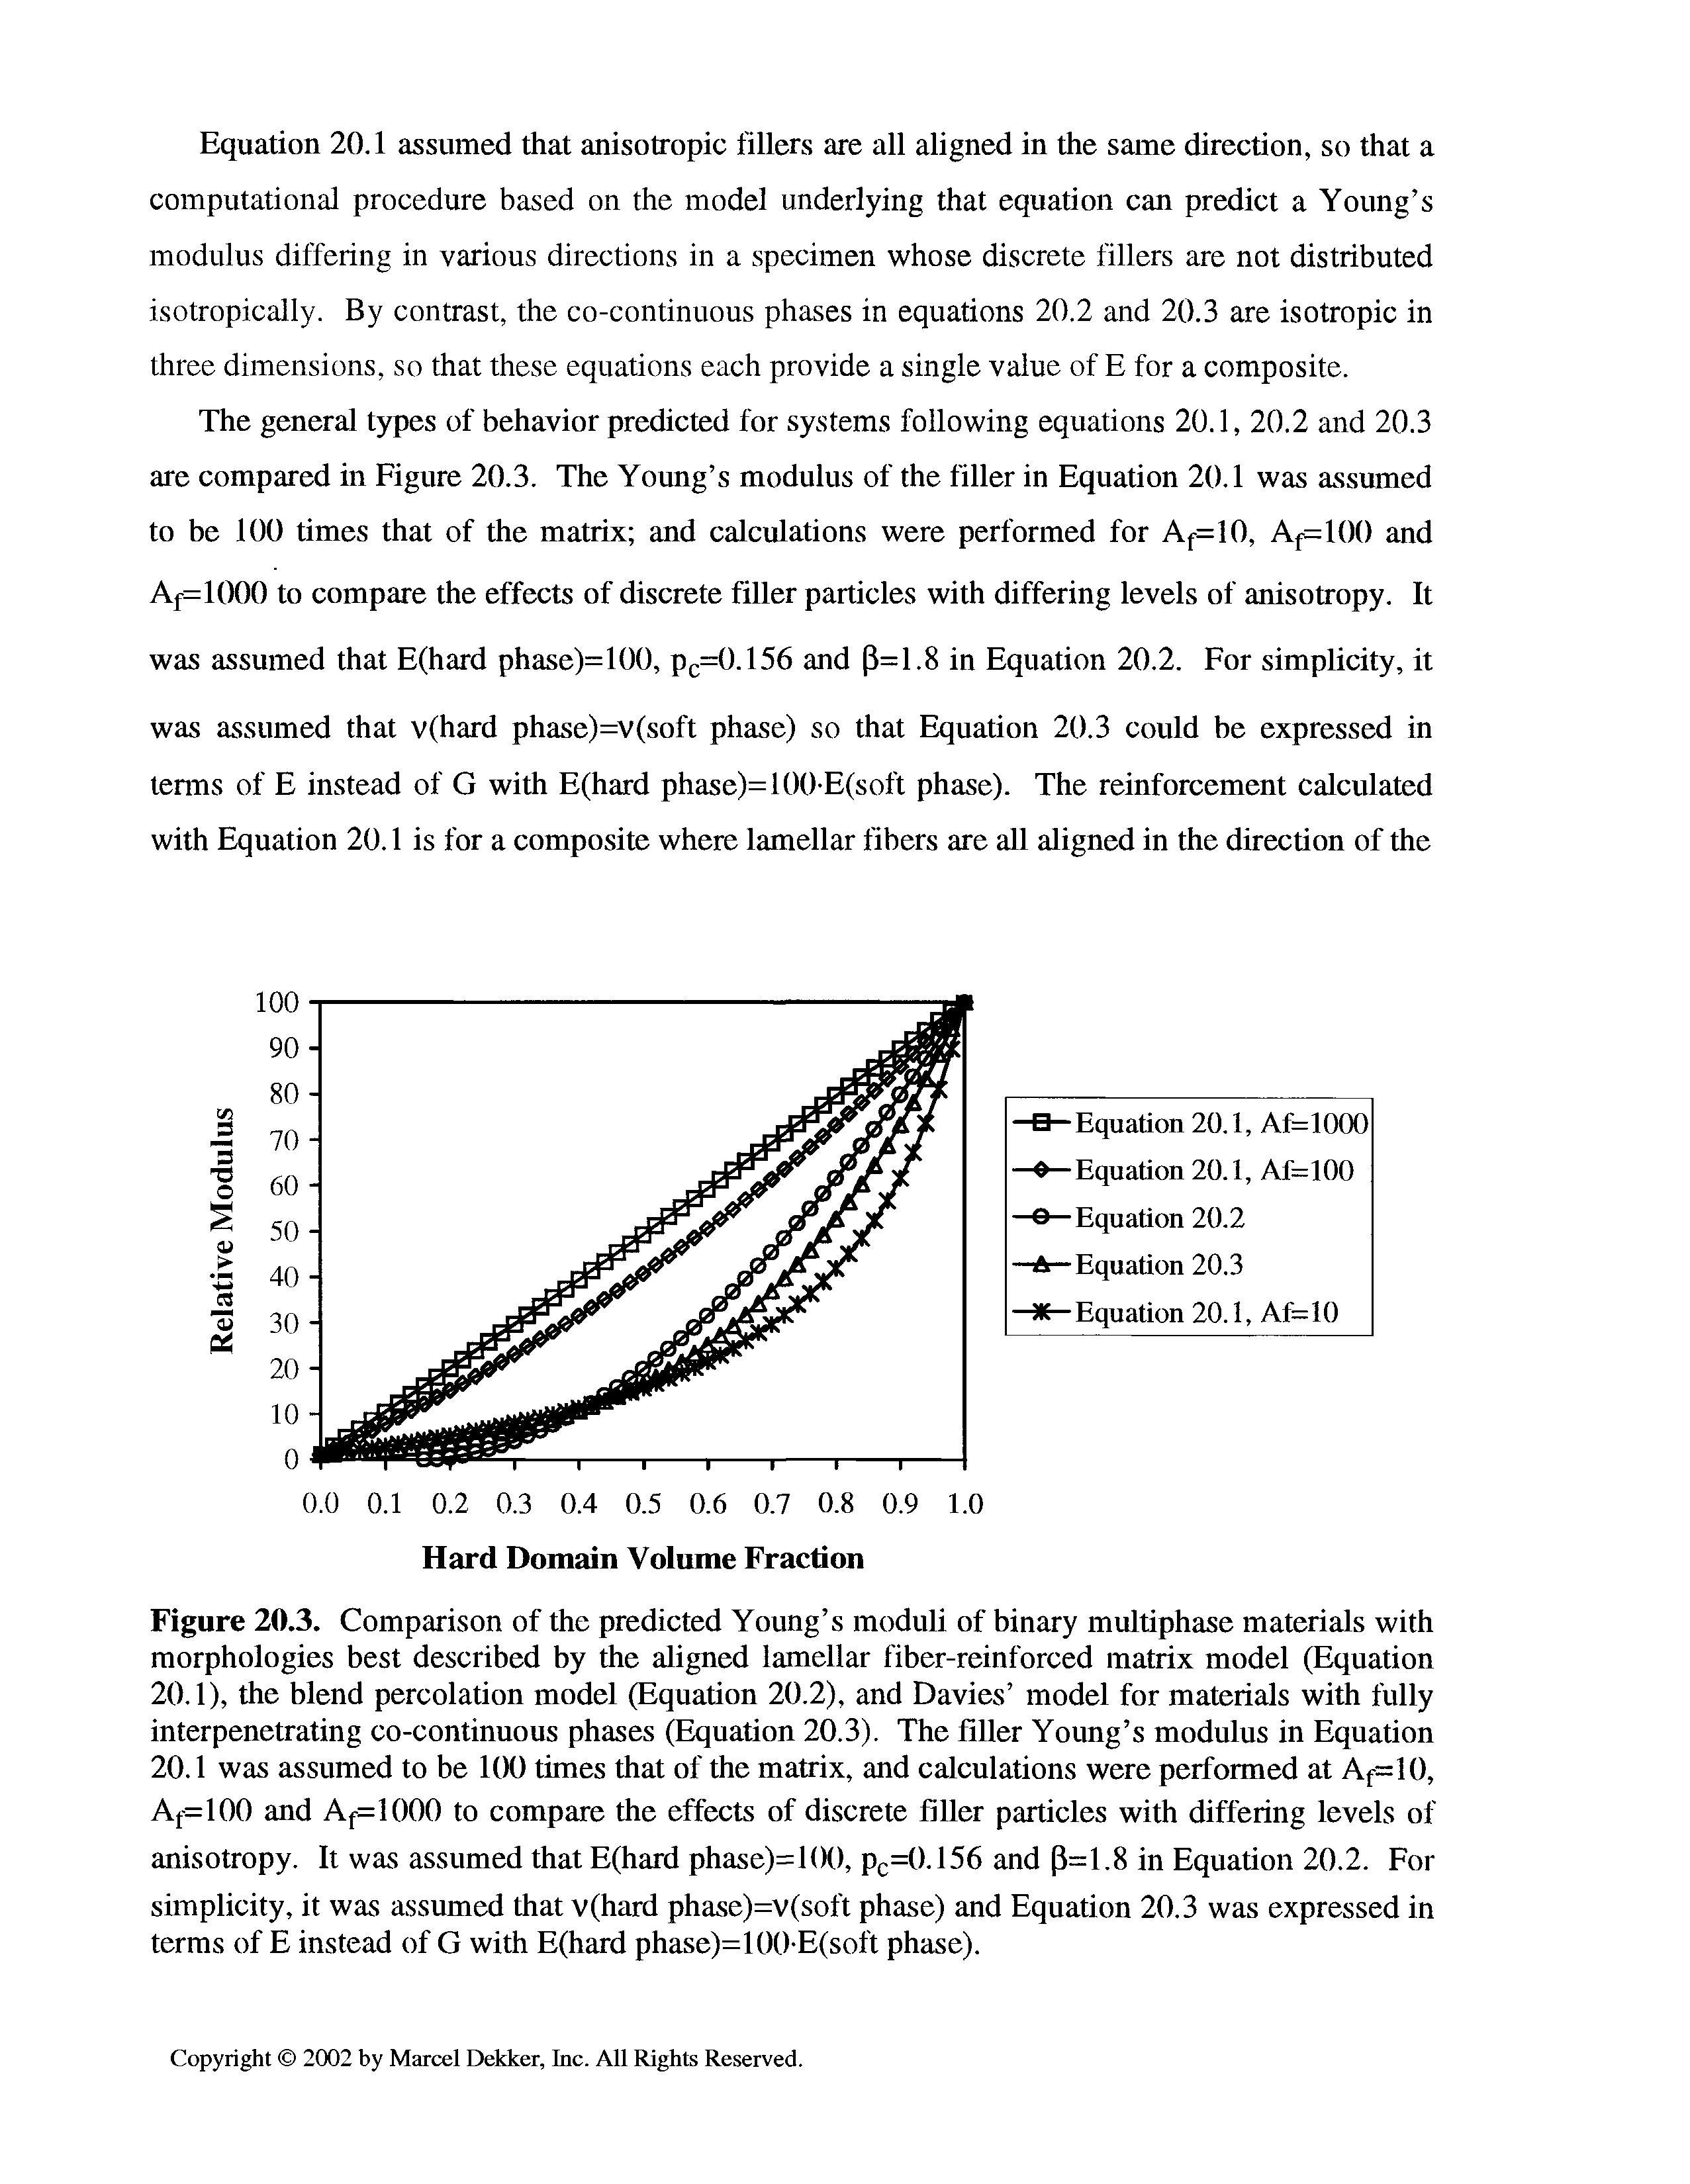 Figure 20.3. Comparison of the predicted Young s moduli of binary multiphase materials with morphologies best described by the aligned lamellar fiber-reinforced matrix model (Equation 20.1), the blend percolation model (Equation 20.2), and Davies model for materials with fully interpenetrating co-continuous phases (Equation 20.3). The filler Young s modulus in Equation 20.1 was assumed to be 100 times that of the matrix, and calculations were performed at Af=10, At-=100 and Af=l()00 to compare the effects of discrete filler particles with differing levels of anisotropy. It was assumed that E(hard phase)=100, pc=0.156 and (3=1.8 in Equation 20.2. For...